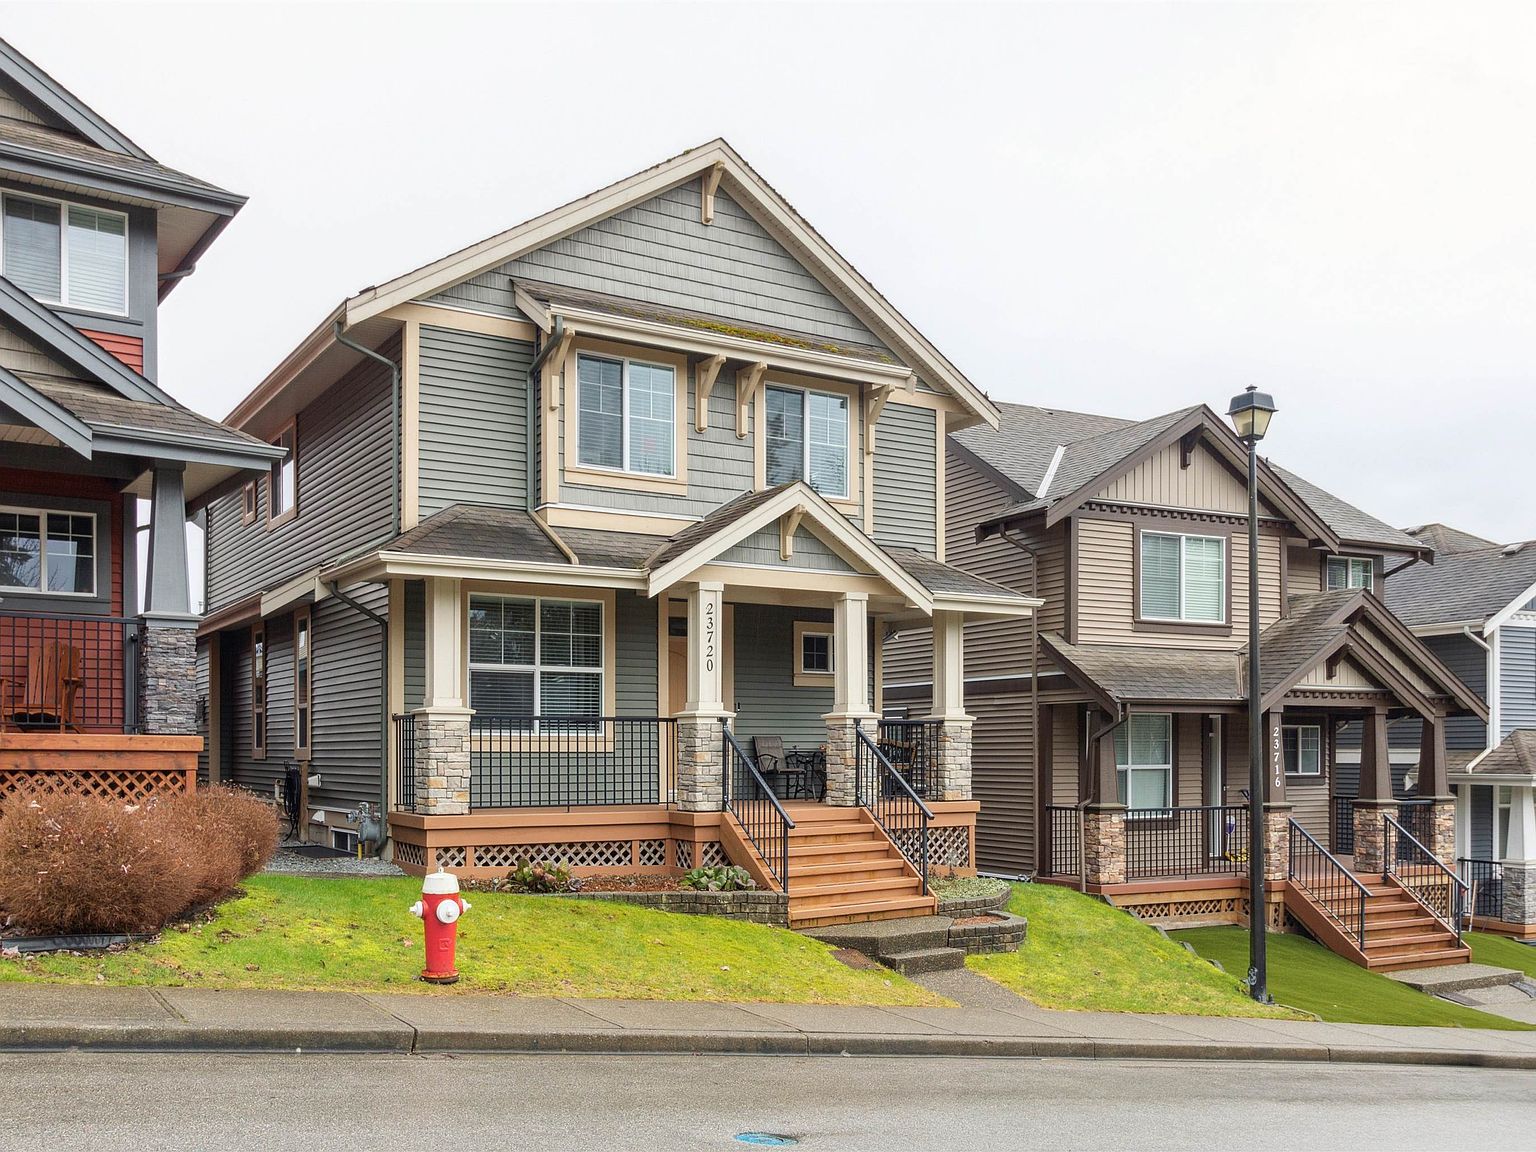 23720 111a Ave, Maple Ridge, BC V2W 2G1 | MLS #R2853049 | Zillow